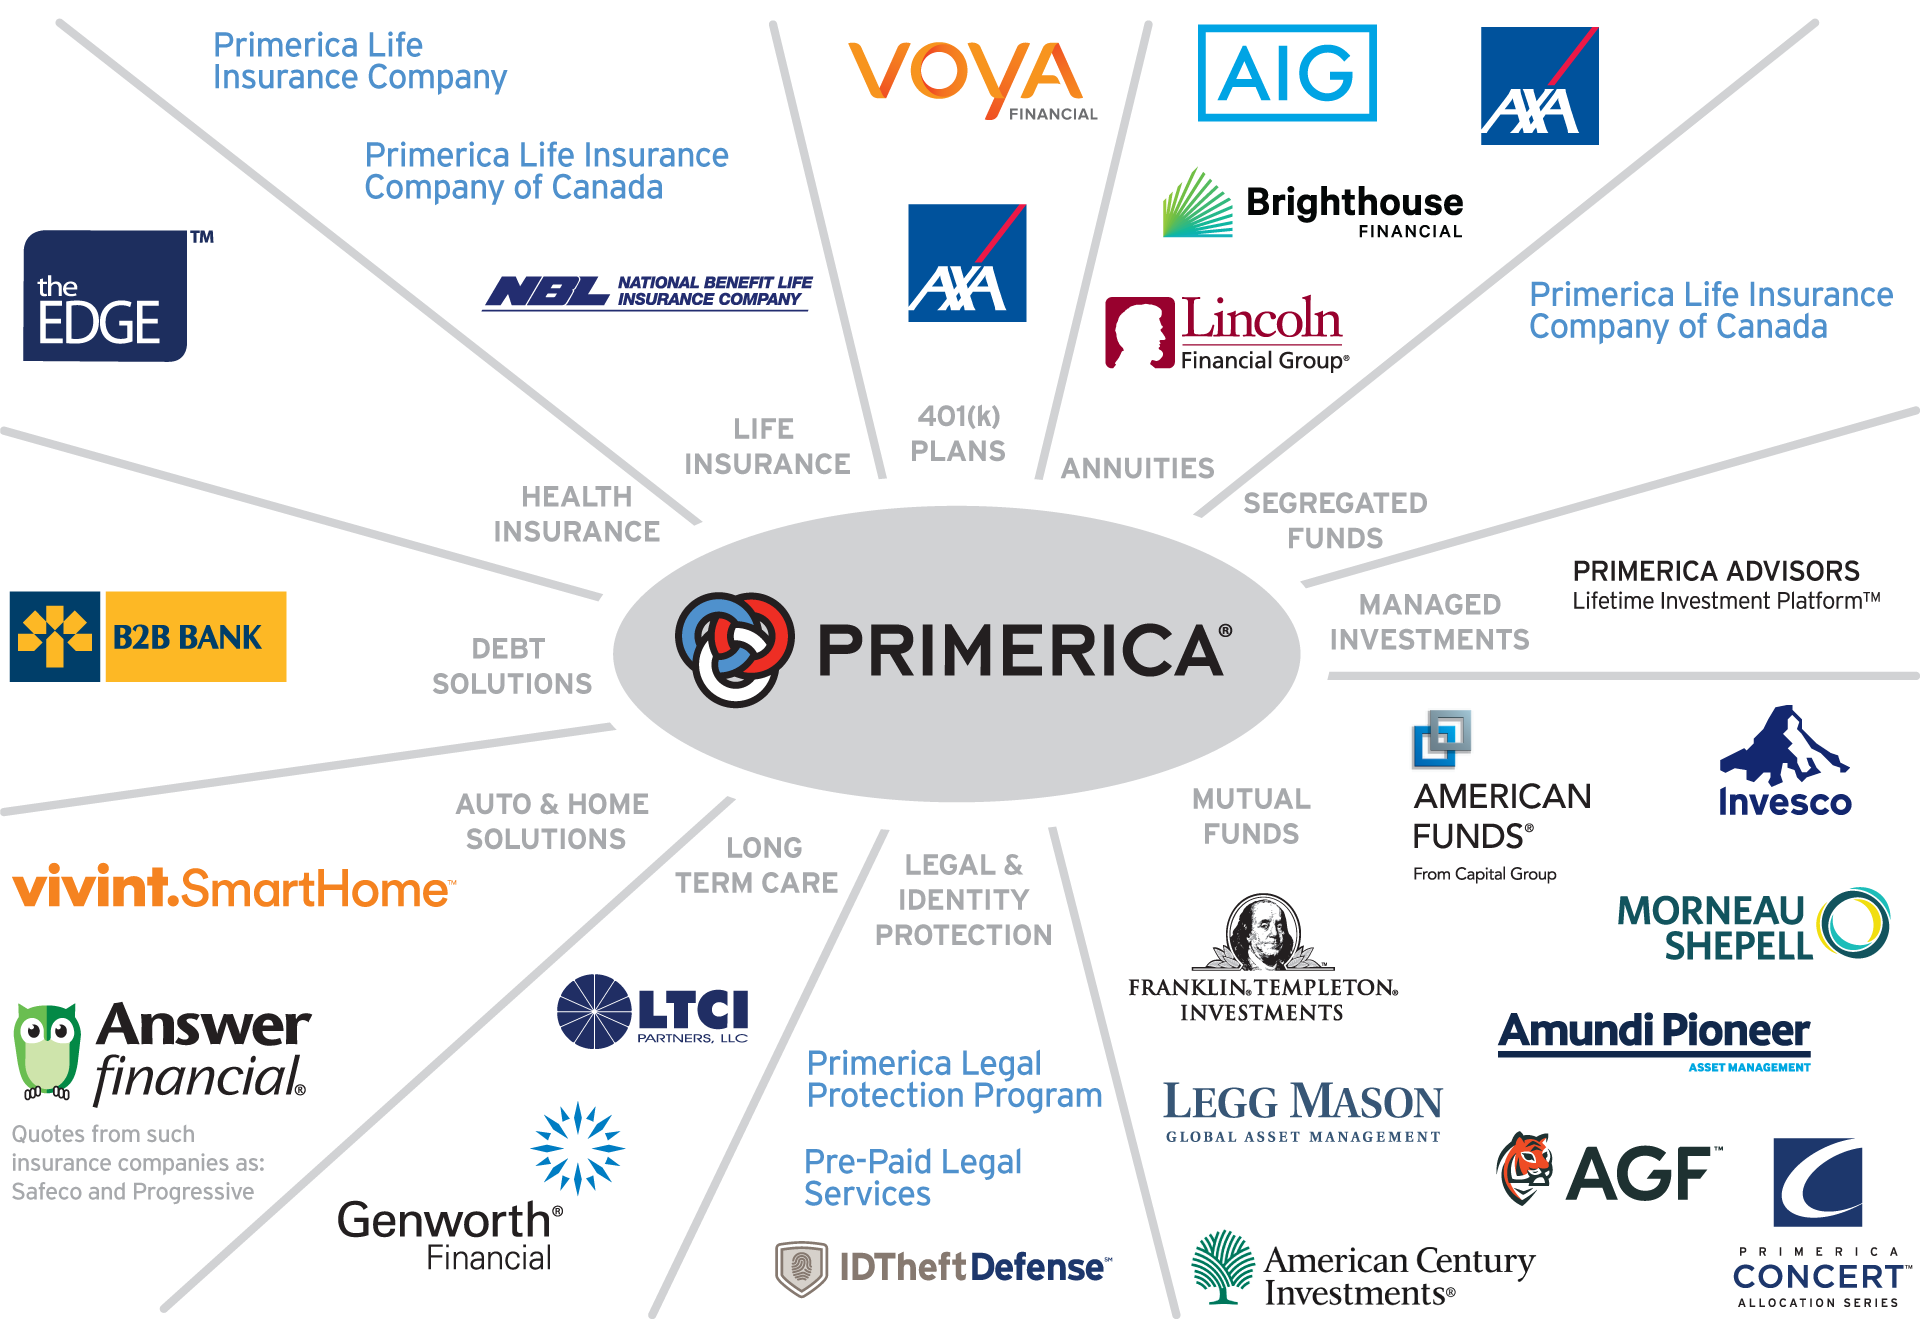 How To Cancel Primerica Legalshield All information